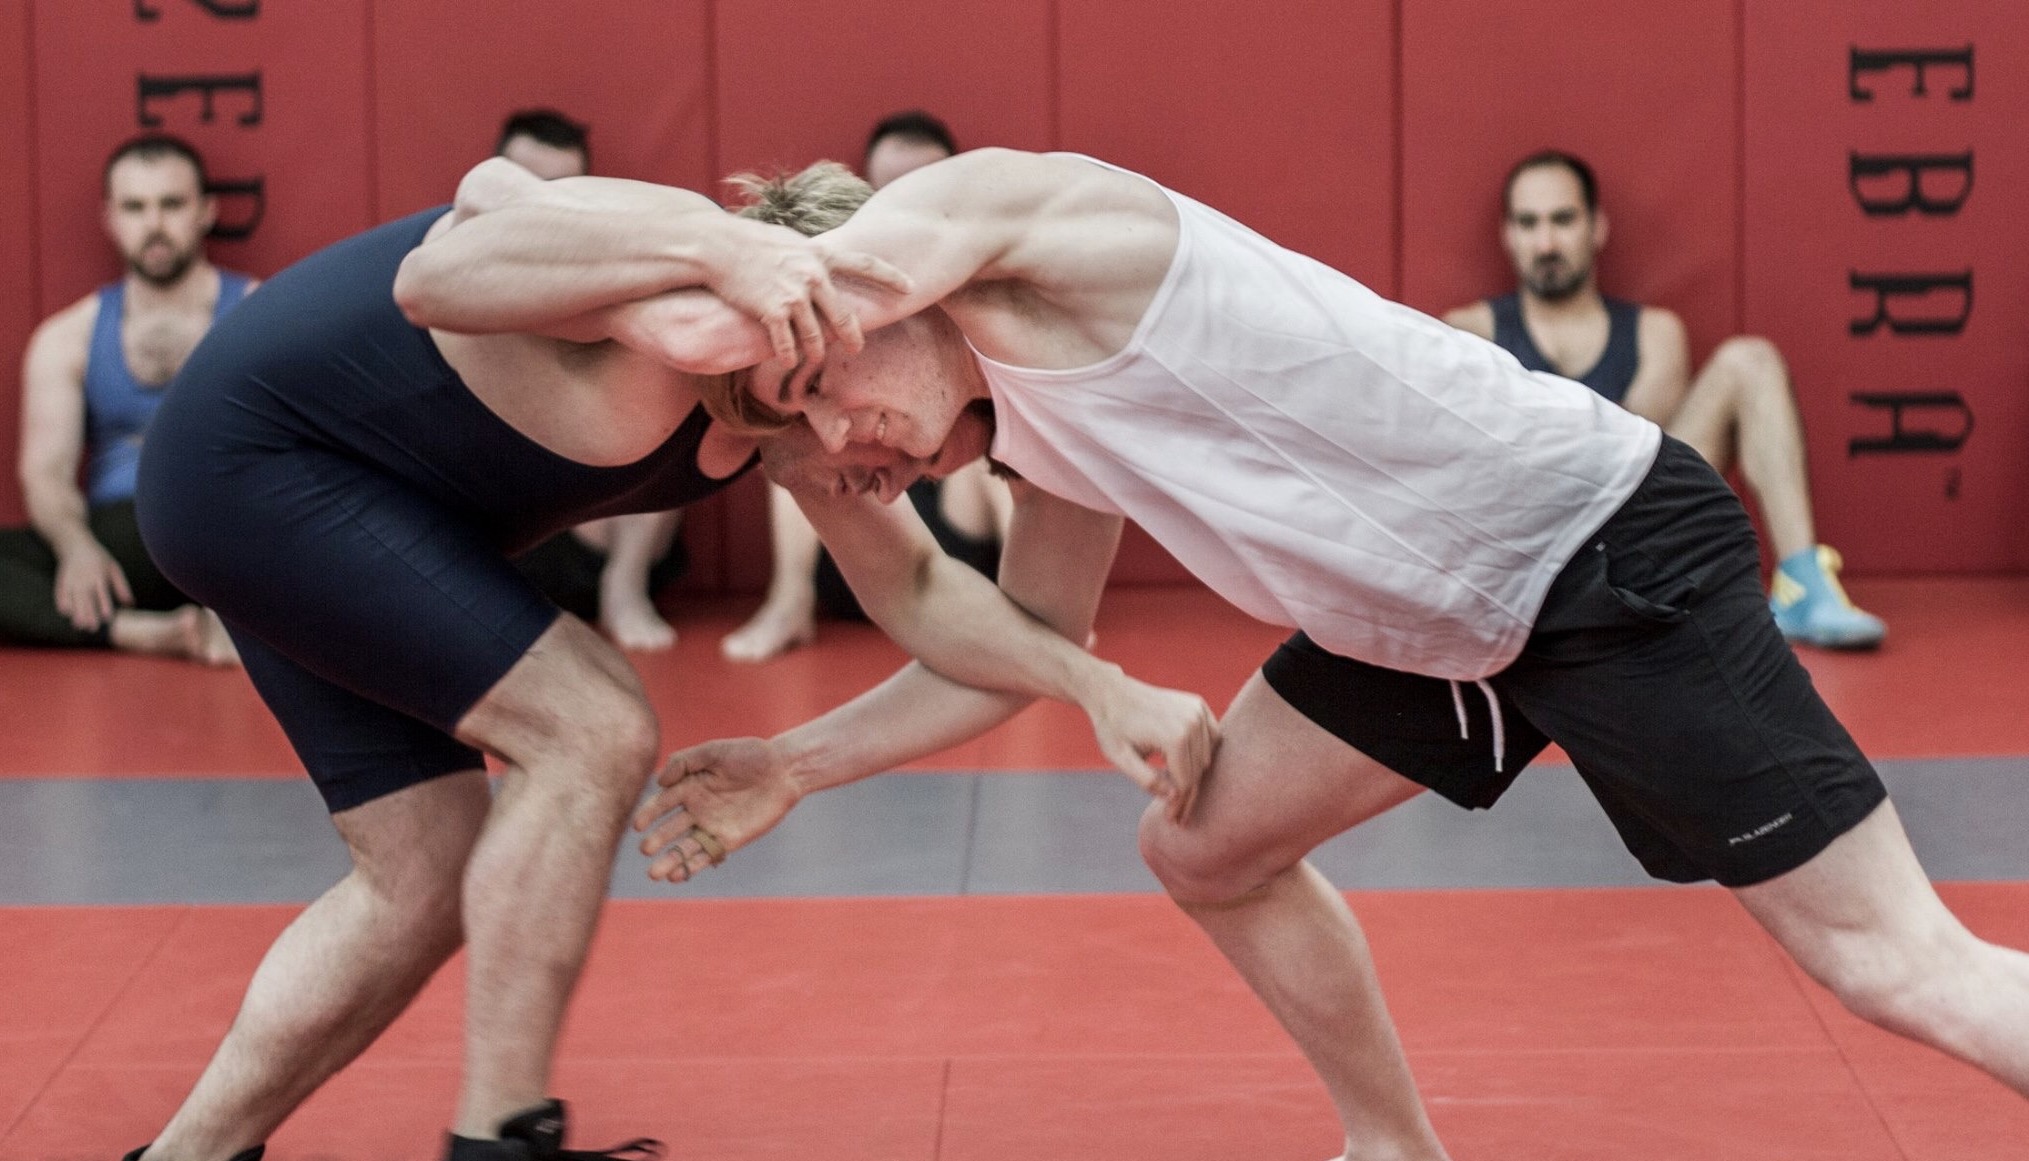 Melbourne wrestlers aim to break gender and sexuality stereotypes